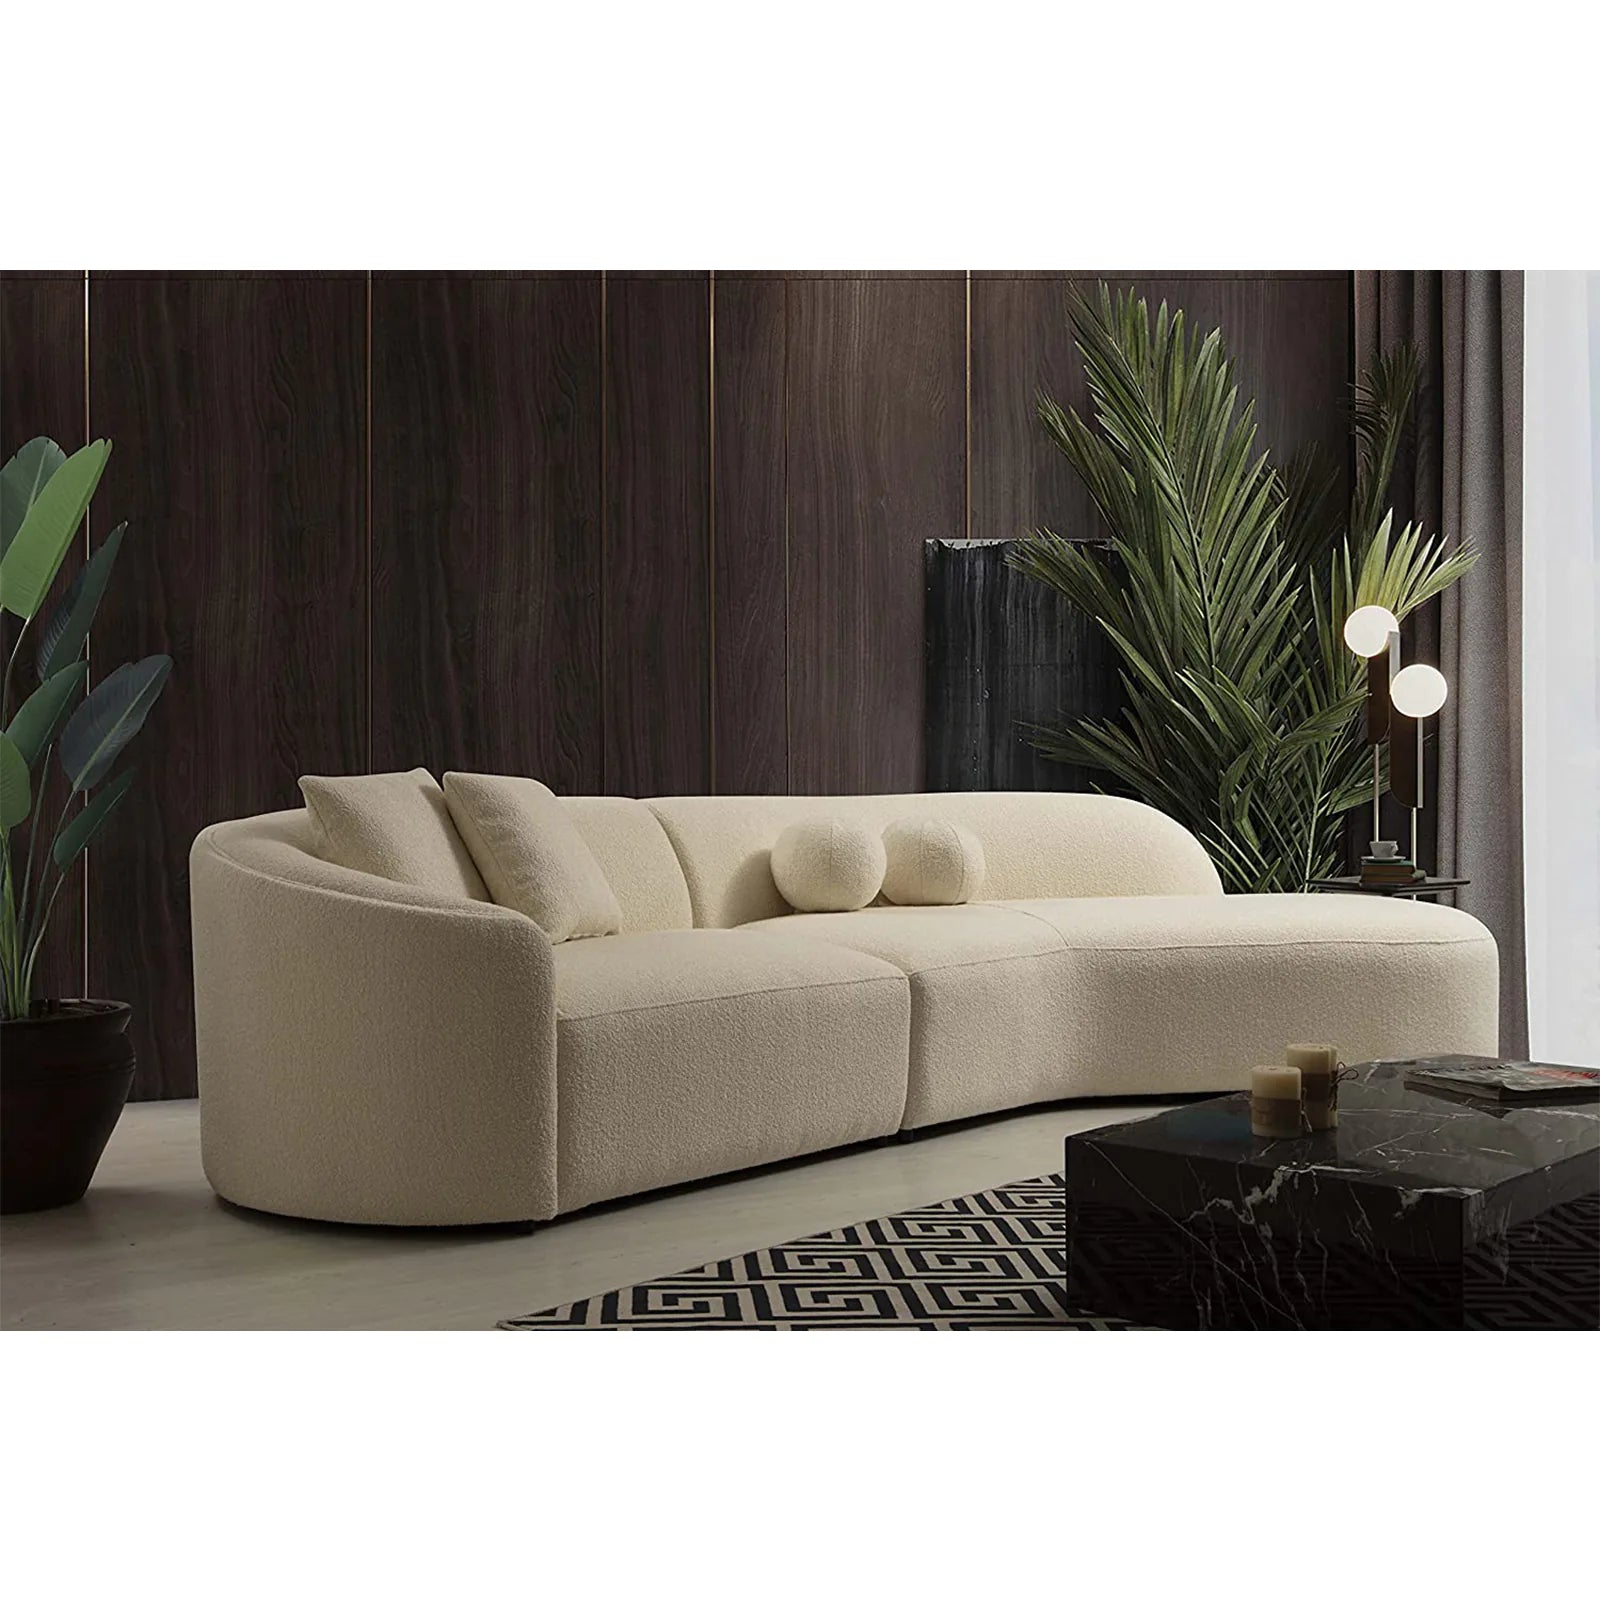 Curved Luxury Modern Sectional Lounge Chaise